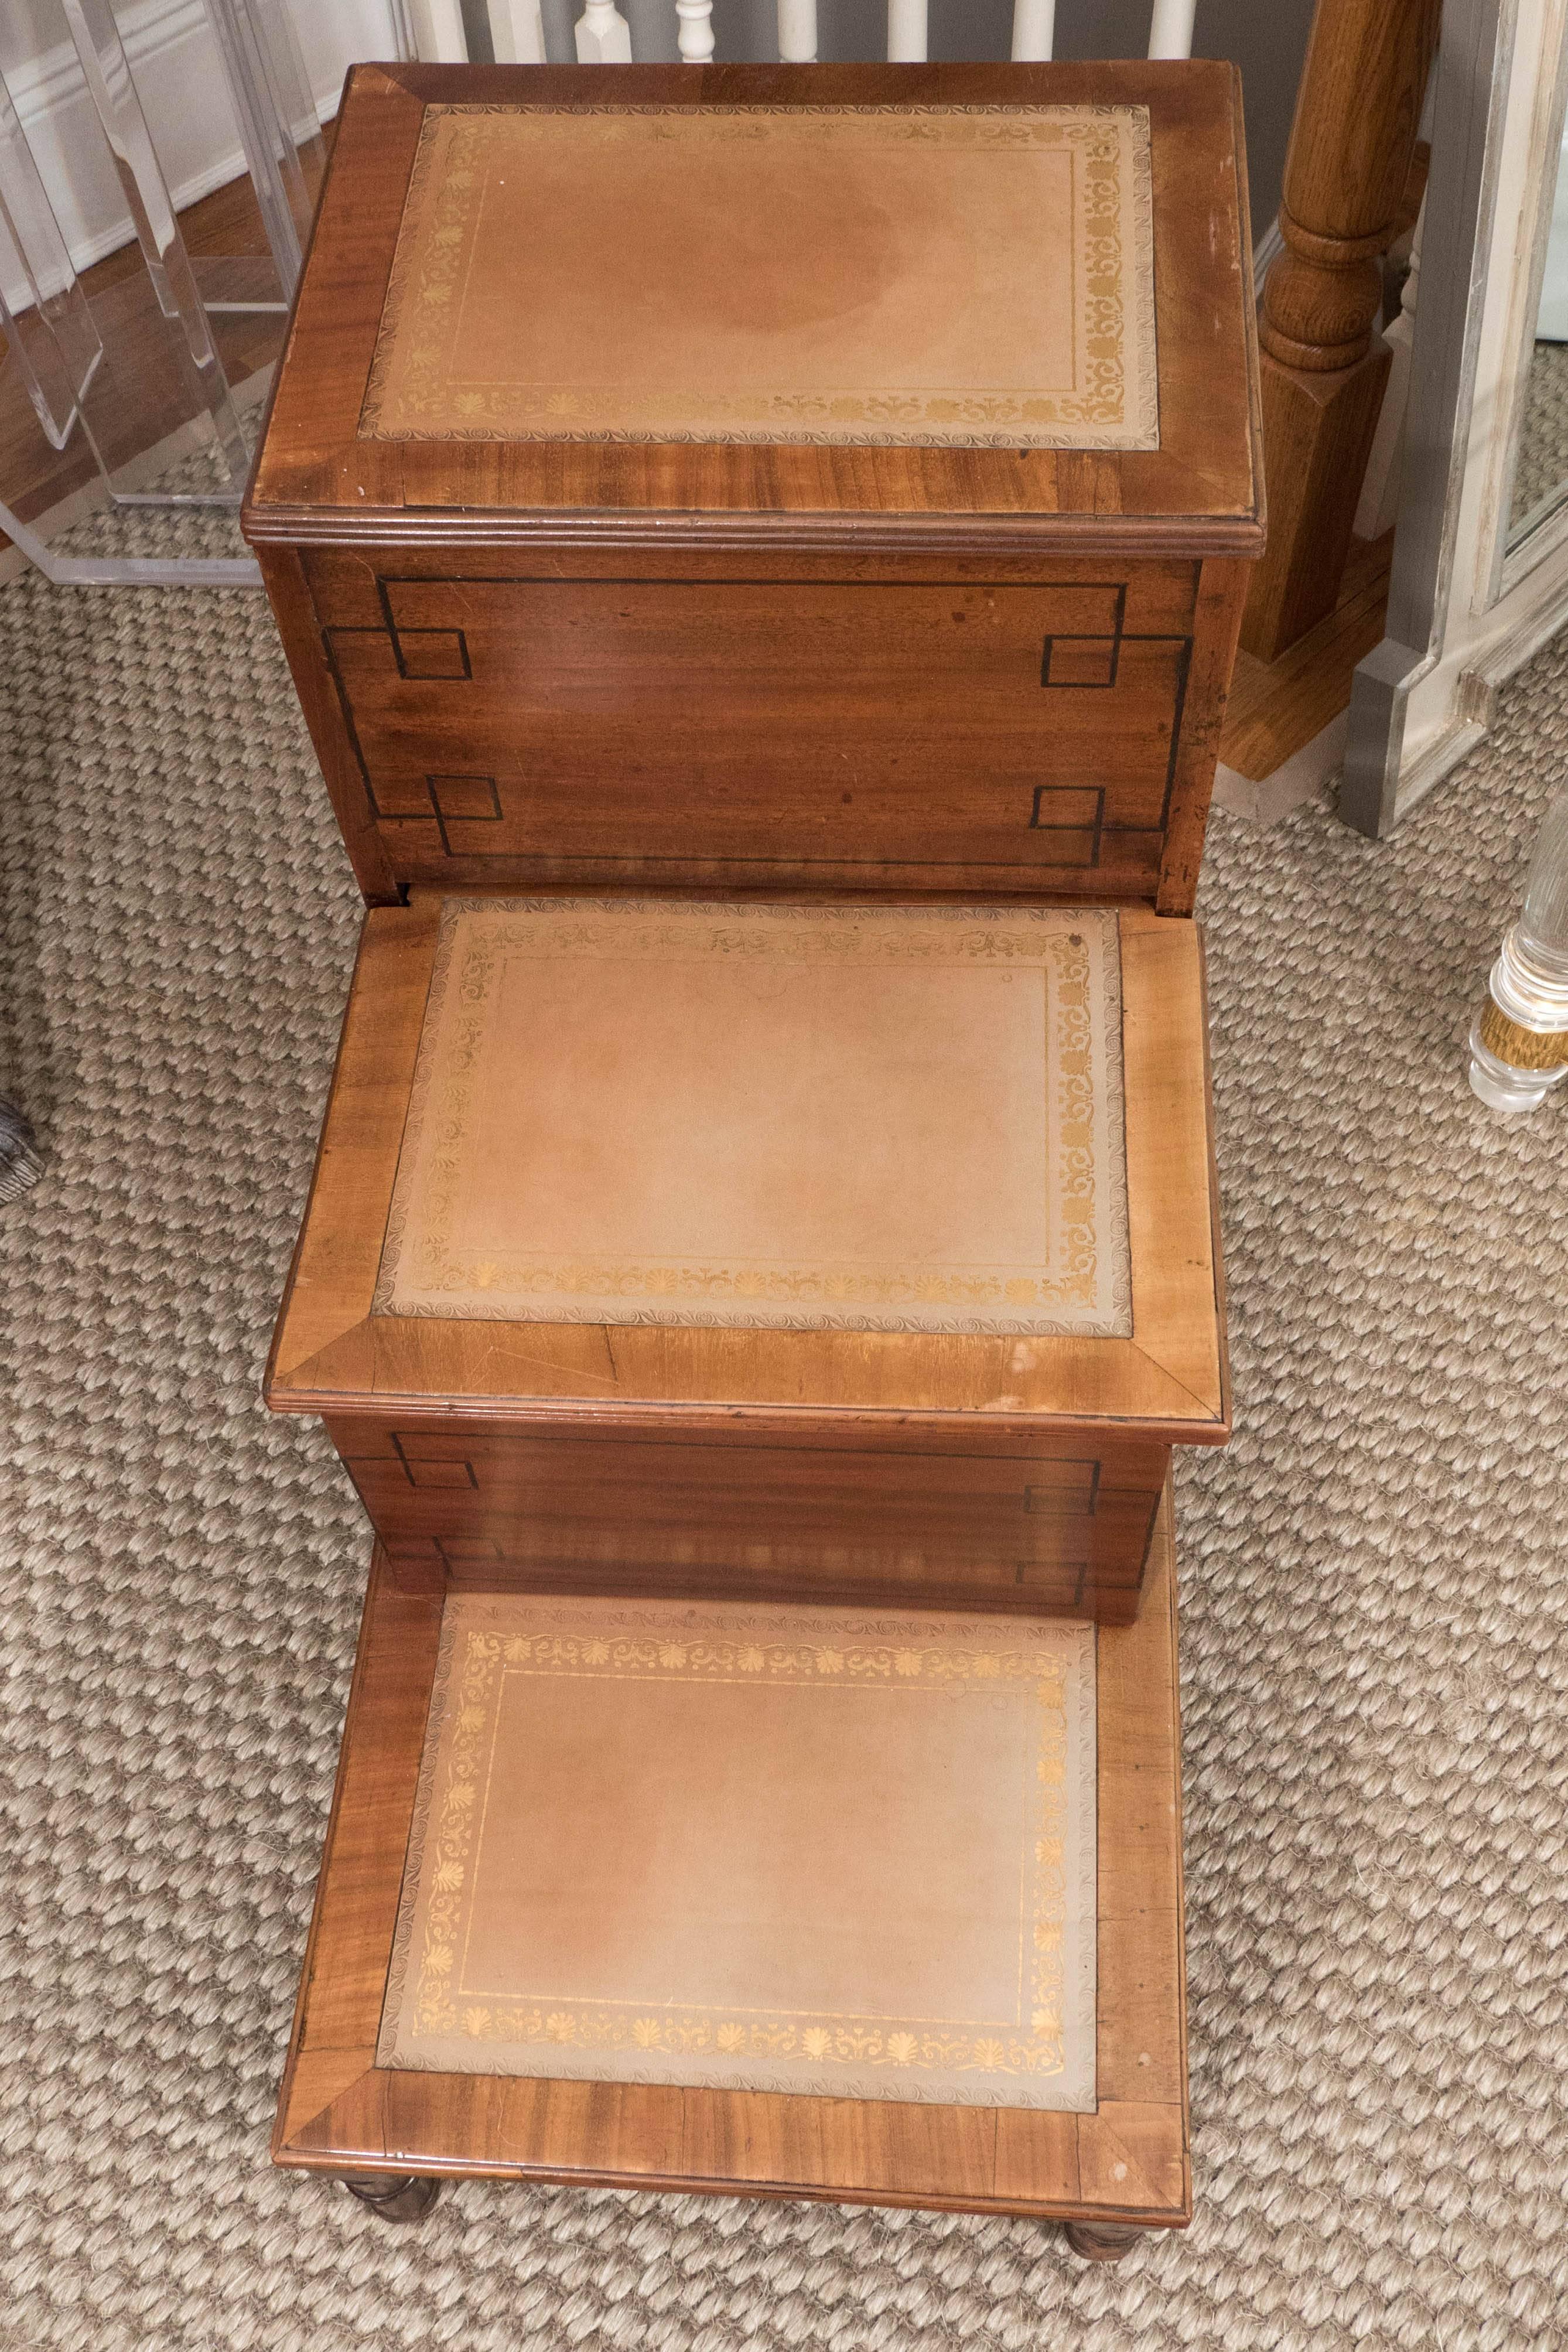 A handsome set of library steps in light mahogany with a lovely tan tooled leather, ebonized inlaid design on front of steps and reeded detail on base and tops of steps. The piece includes two storage compartments. This piece, from Belgium. Has both